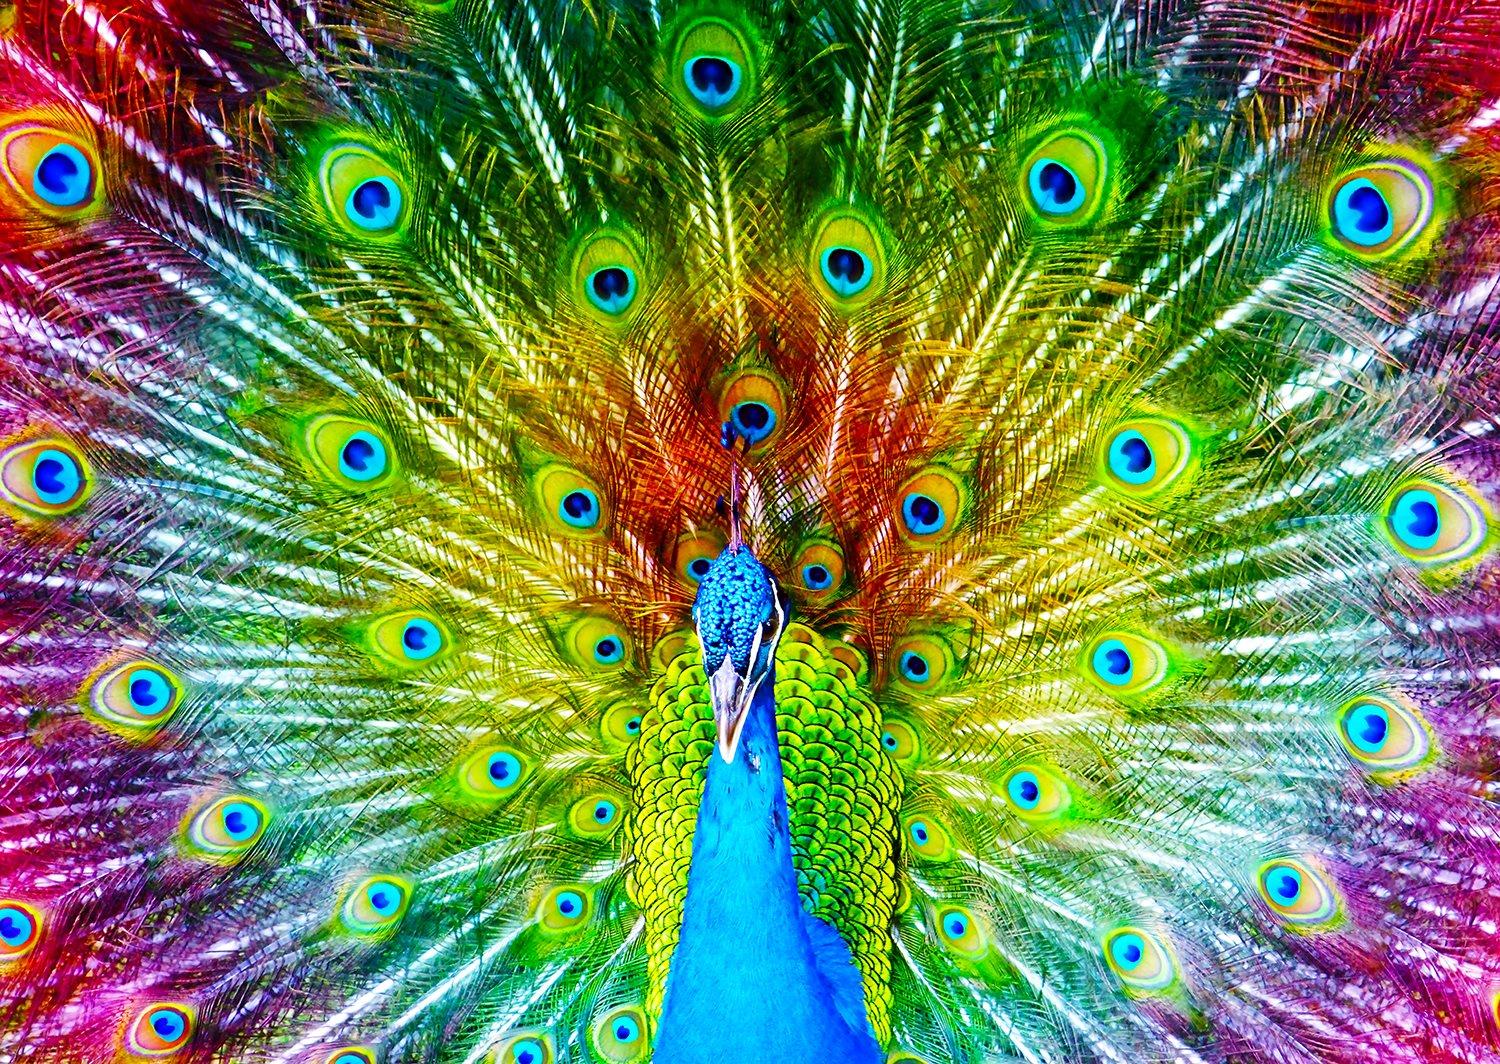 Enjoy Colorful Peacock Jigsaw Puzzle (1000 Pieces)